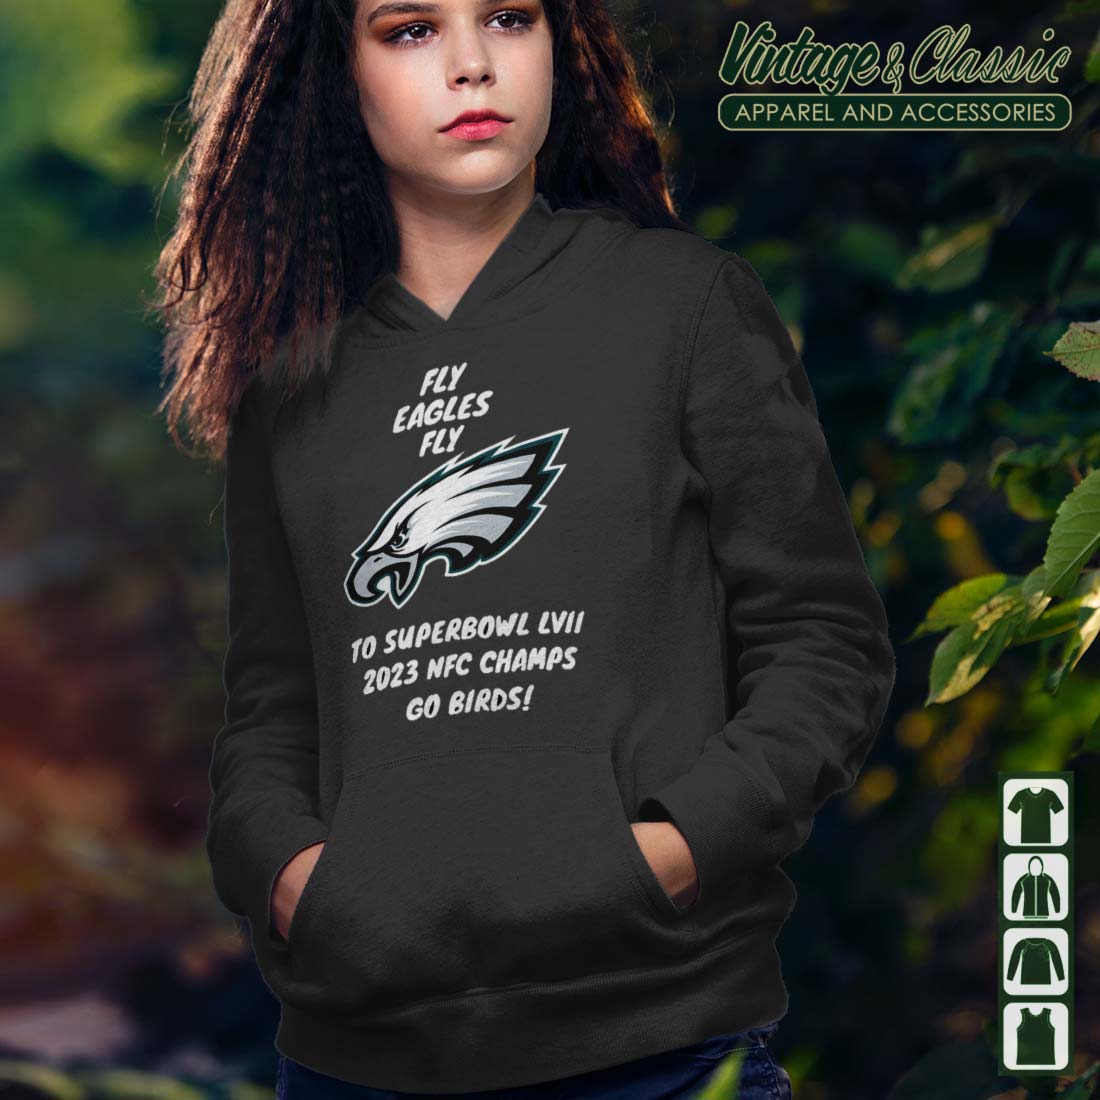 fly eagles fly womens shirt